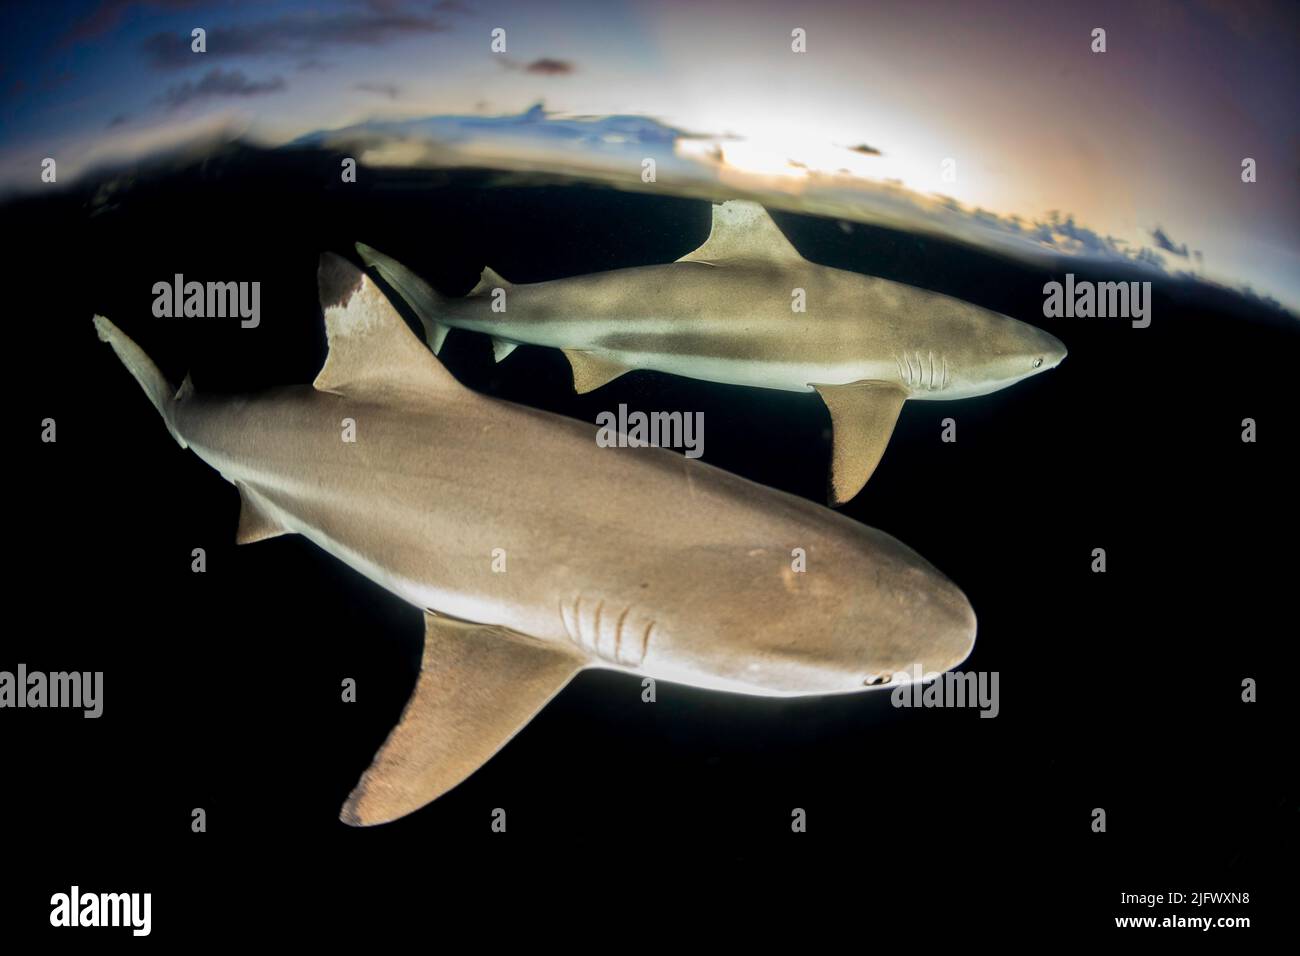 A split image of blacktip reef sharks, Carcharhinus melanopterus, at the surface at dusk off the island of Yap, Micronesia. Stock Photo